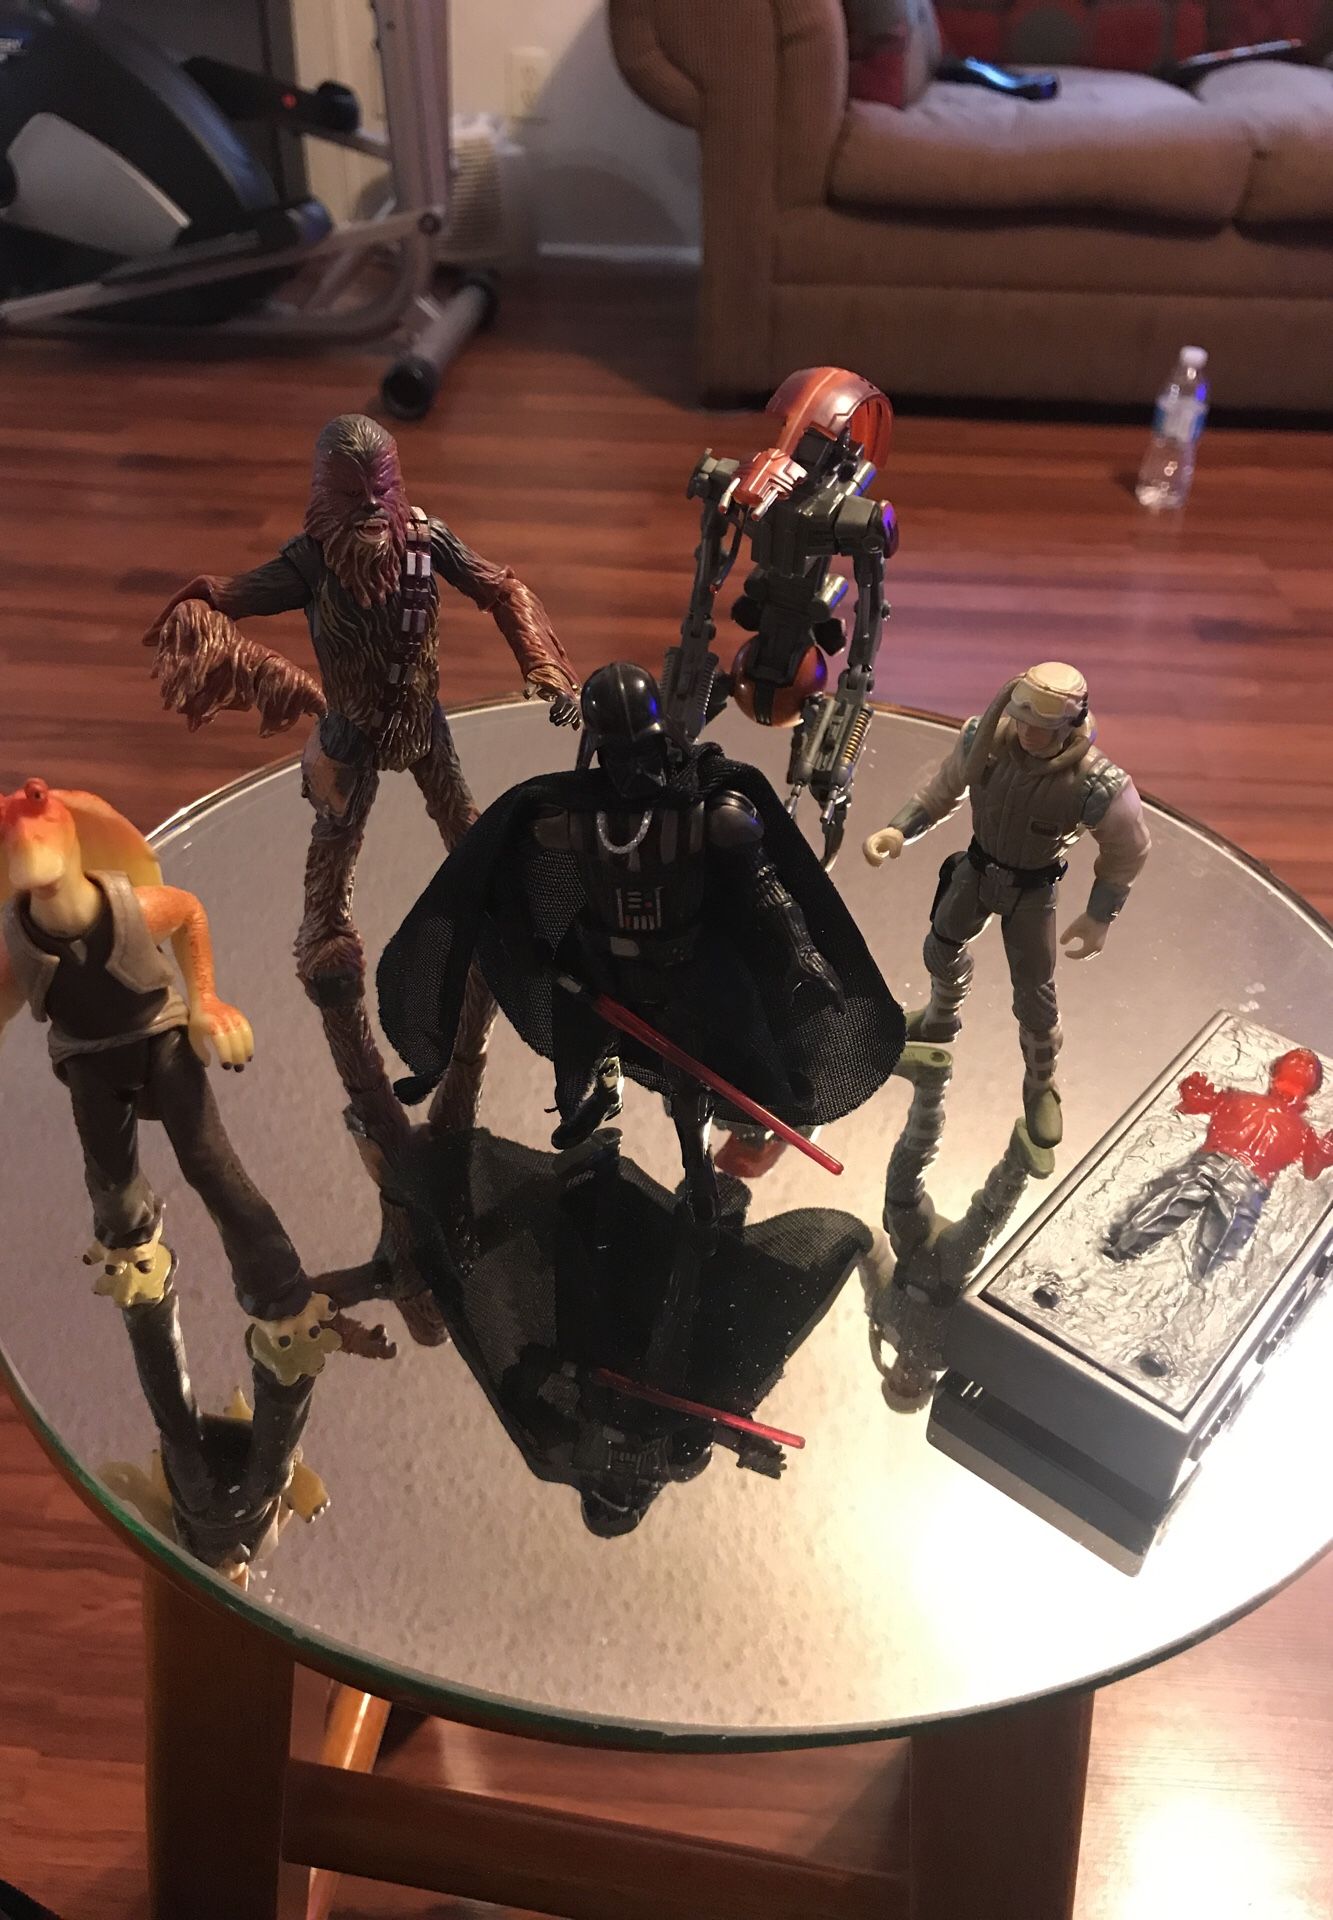 Collectibles, action figures